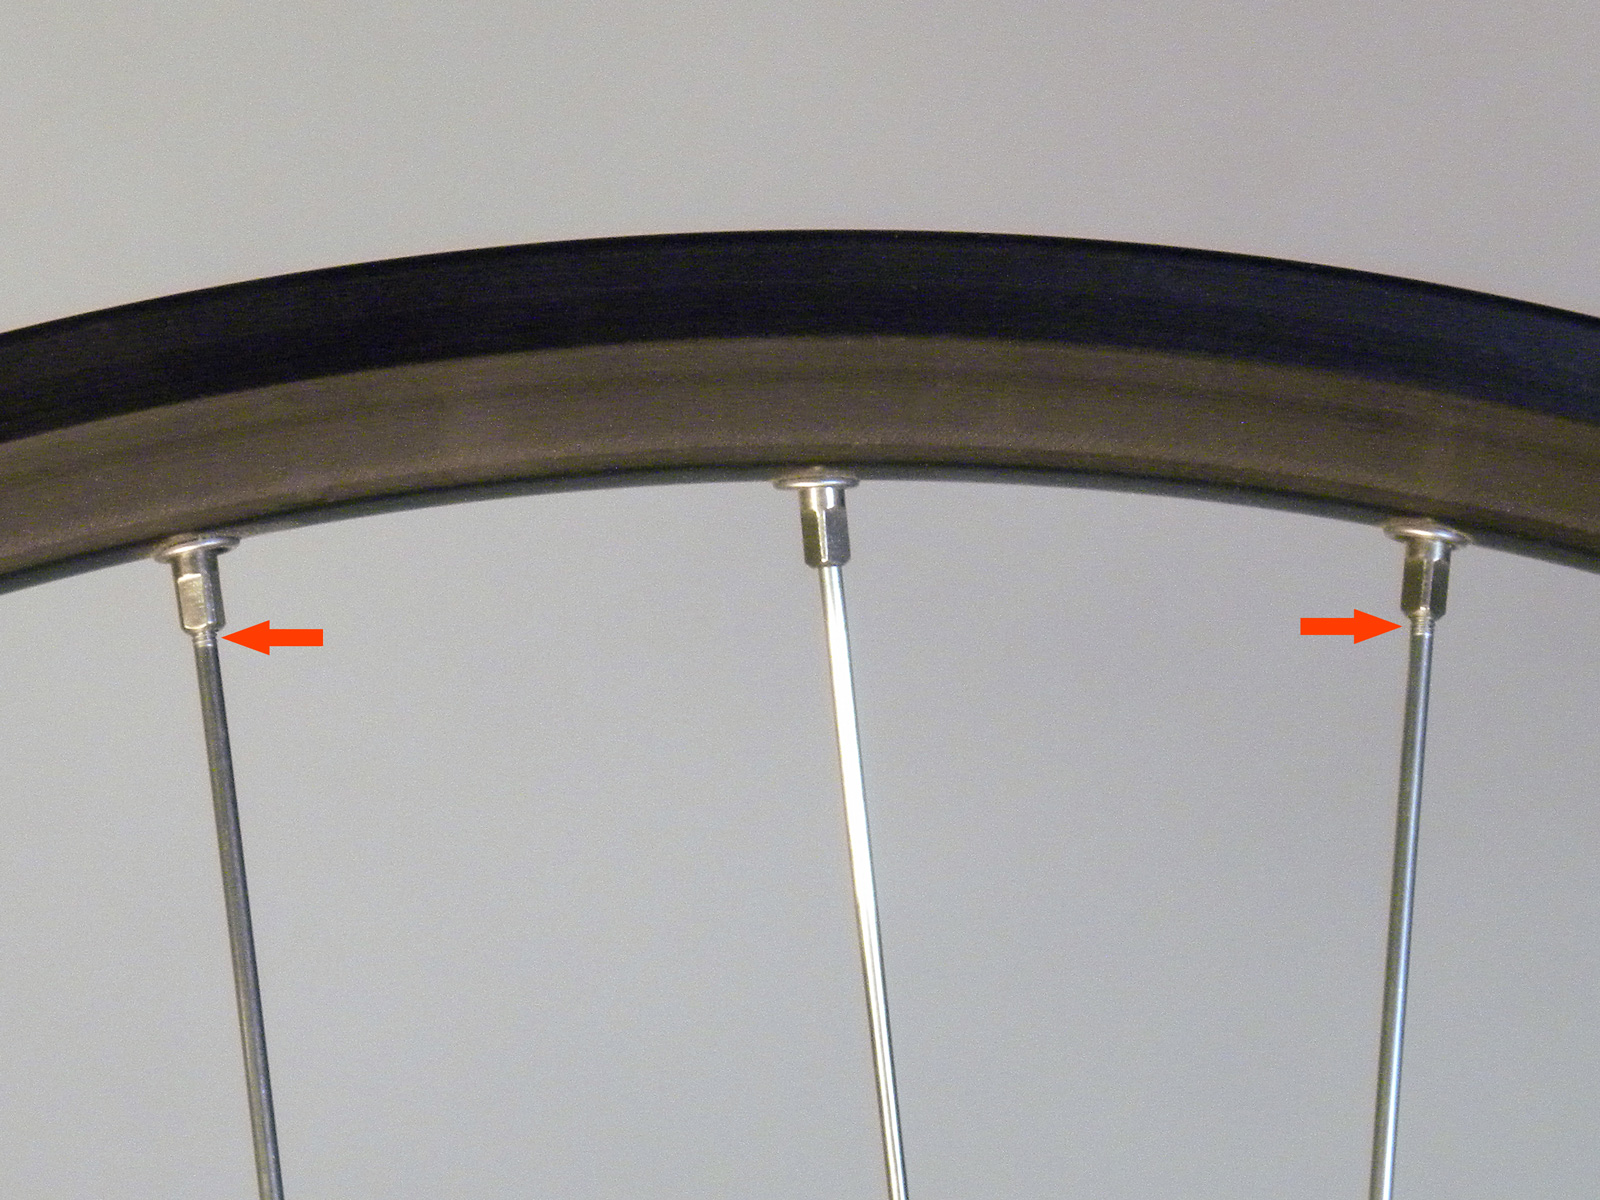 An example of a wheel with slightly too short spokes yet still completely functional